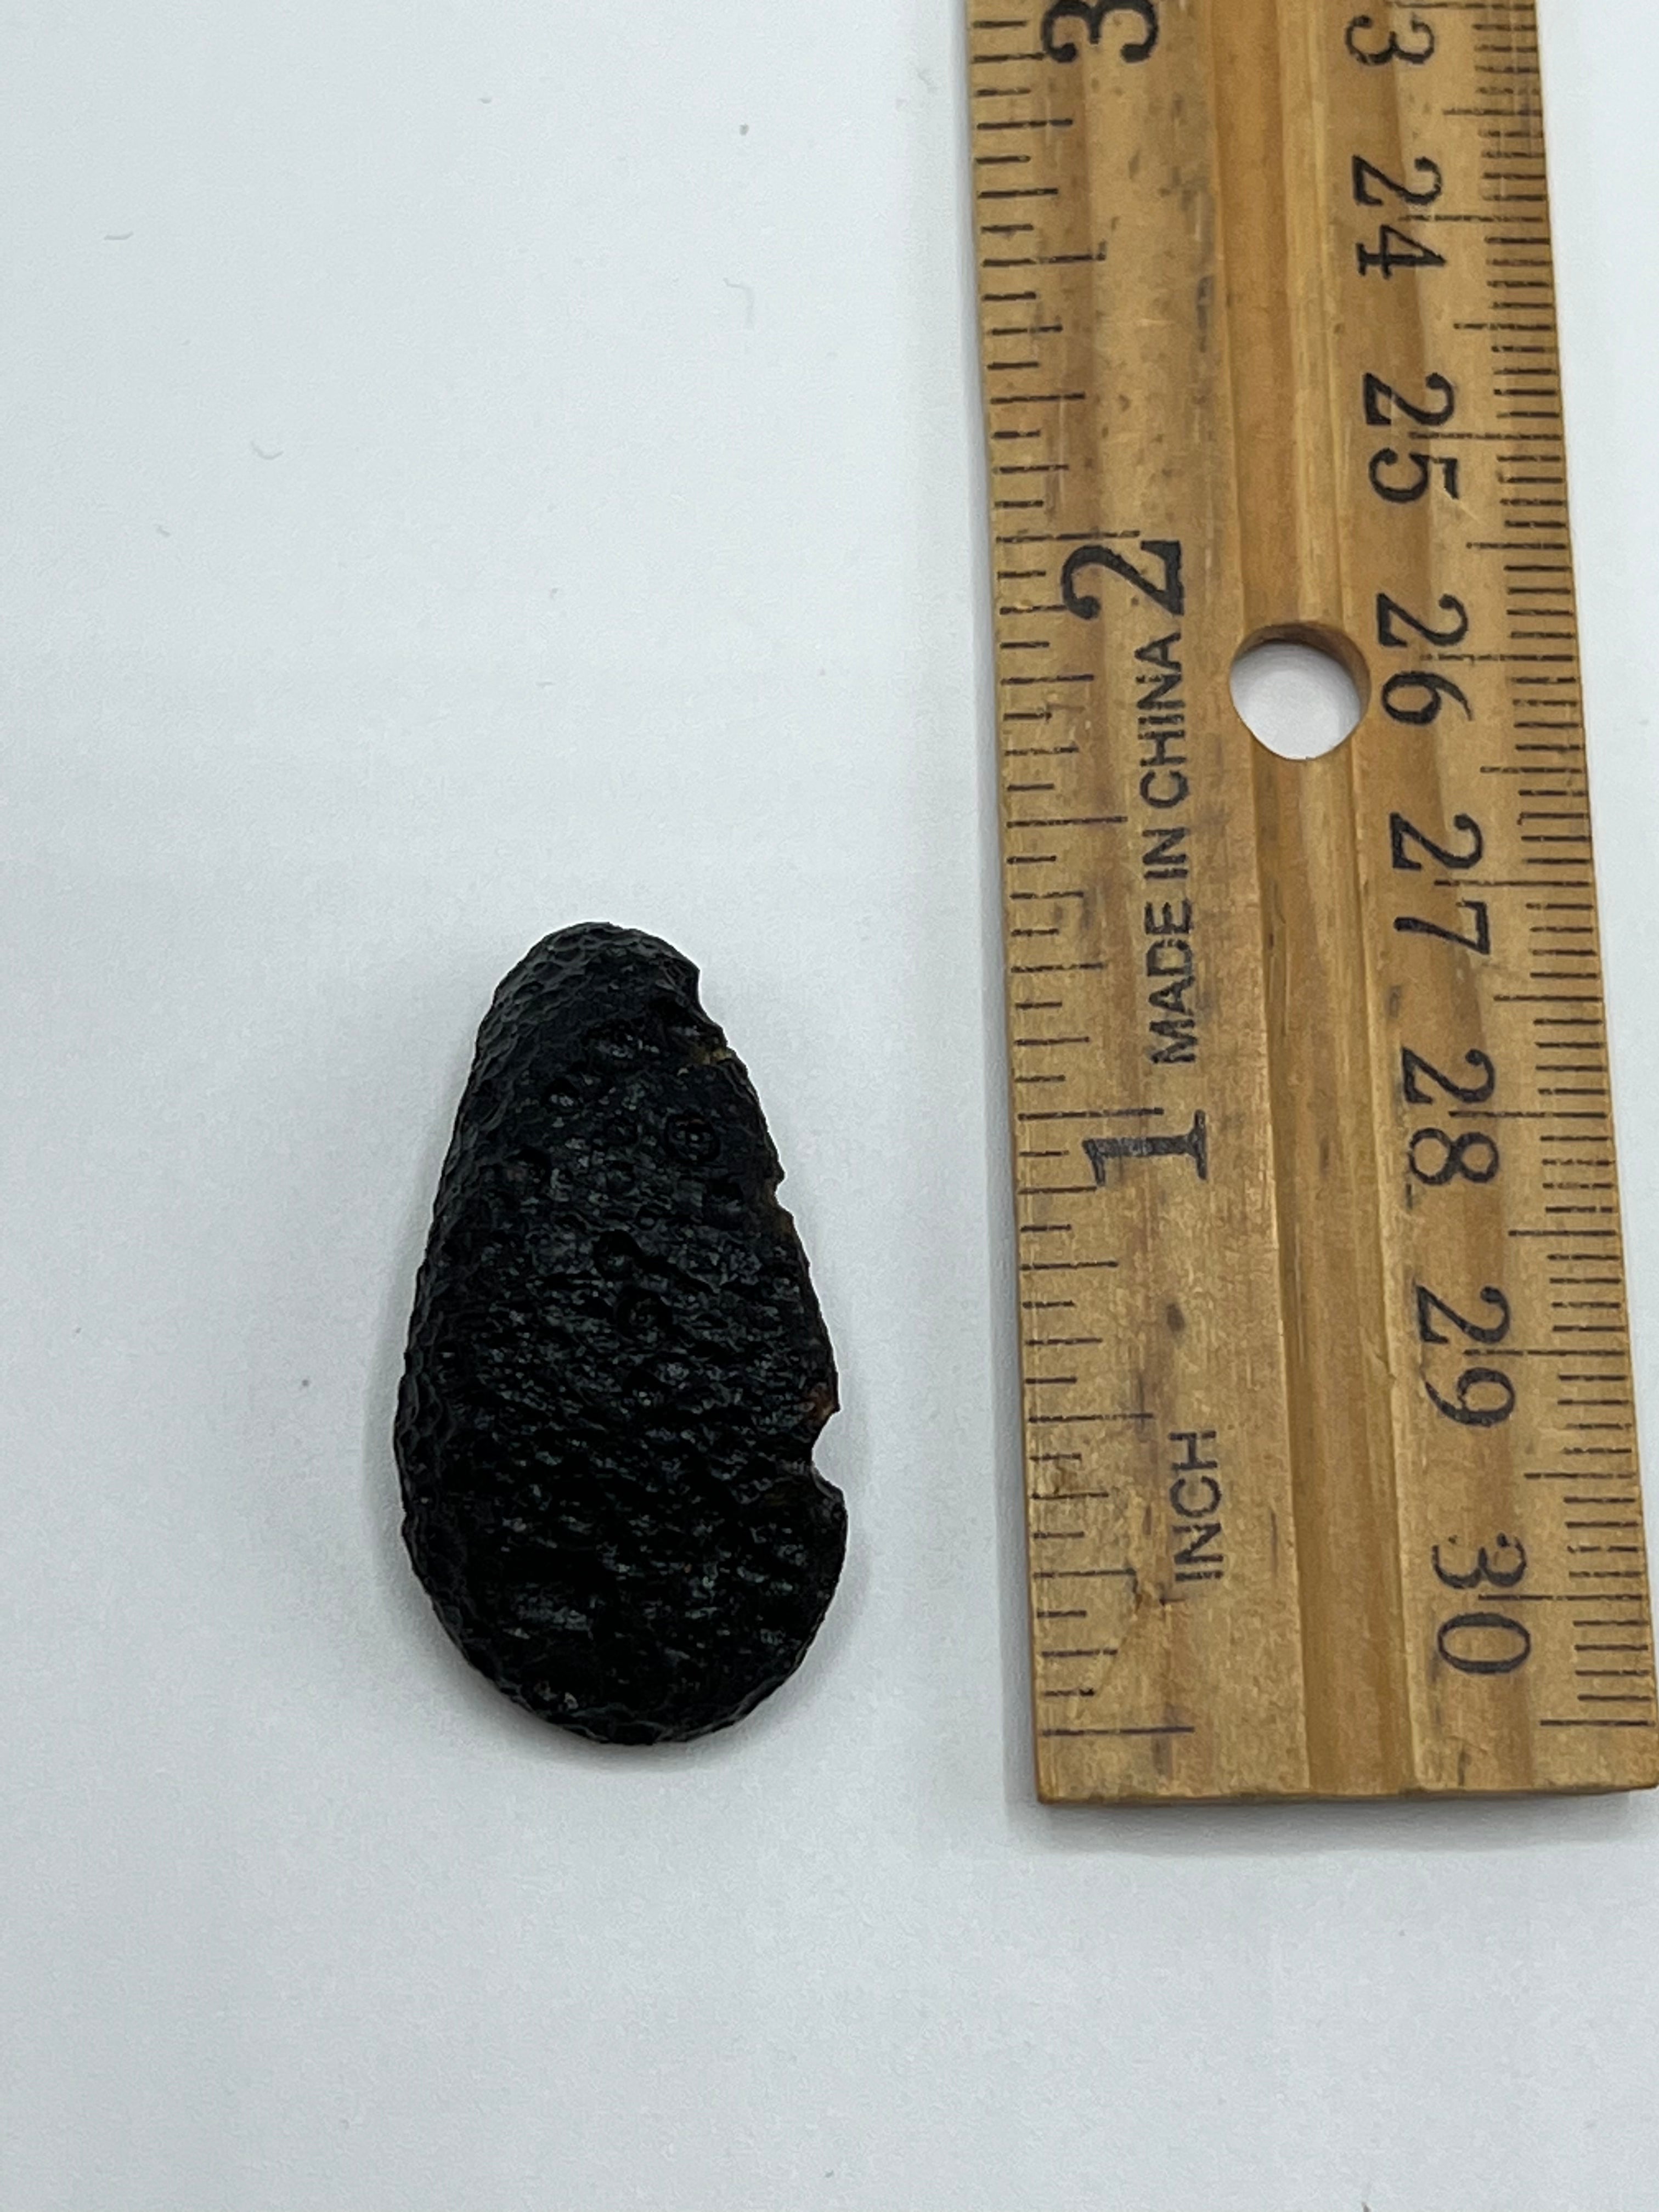 Tektite from Thailand N 5.7g - Earthly Secrets